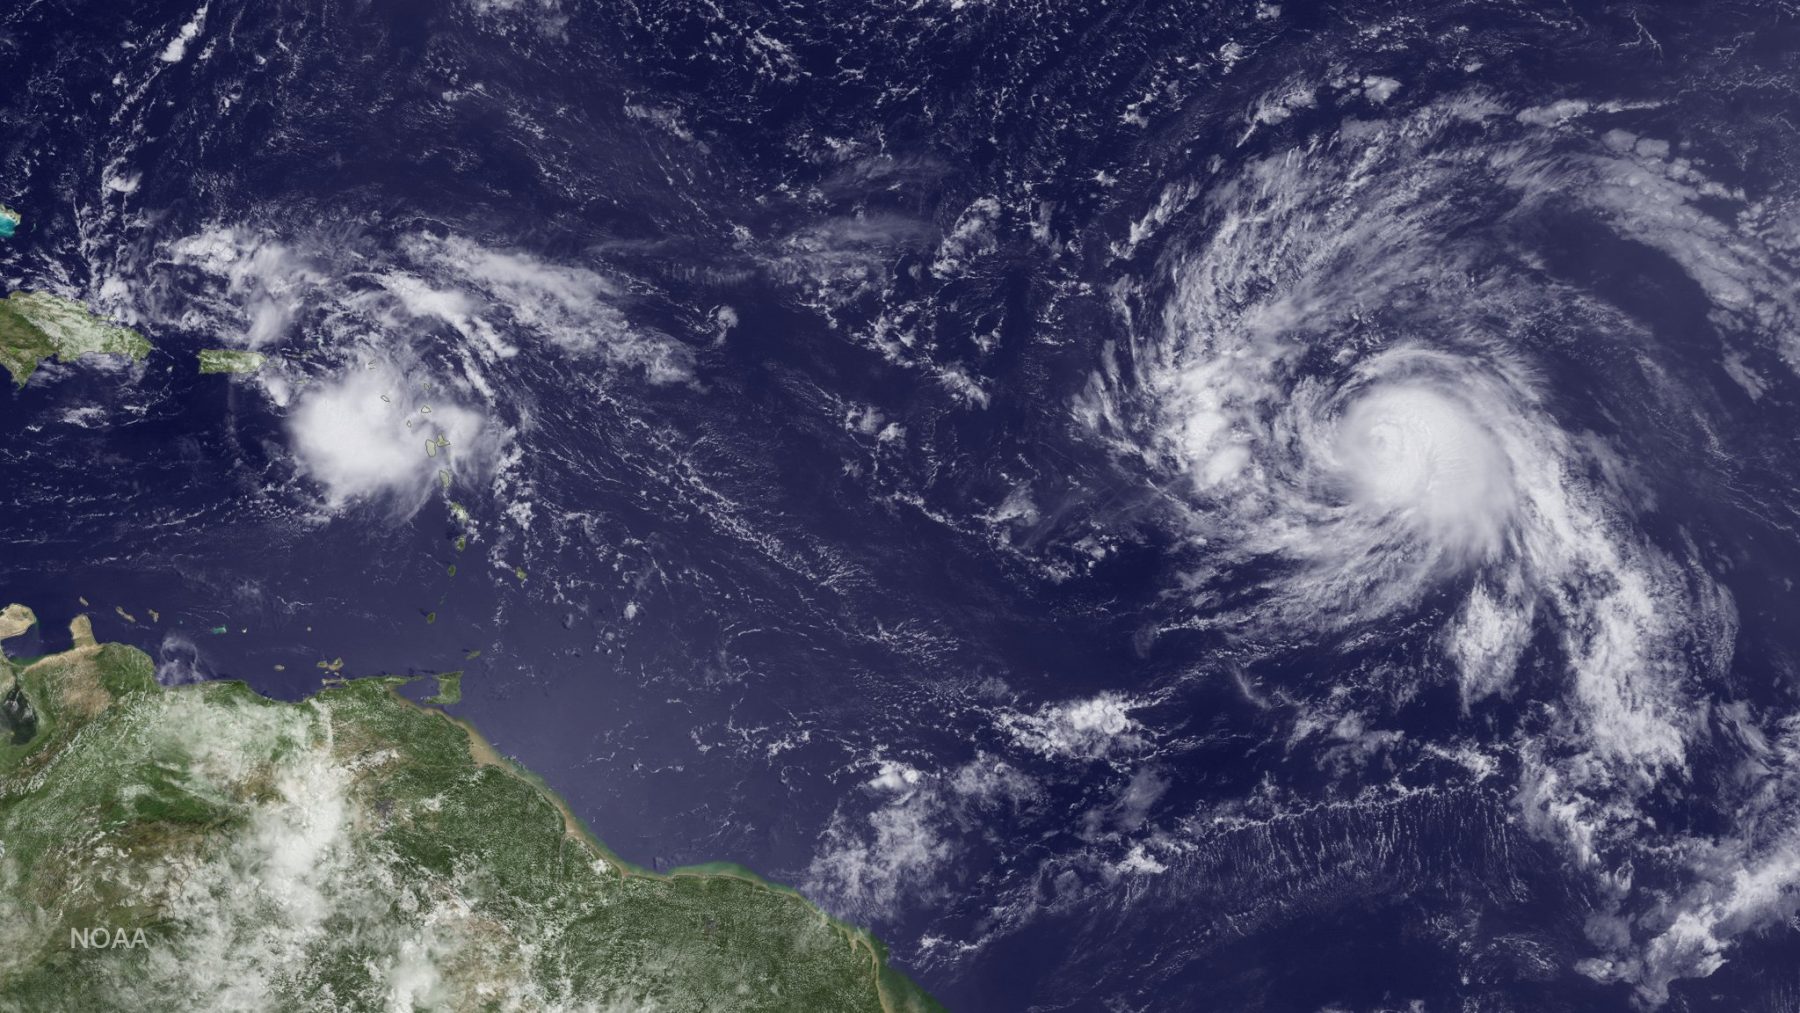 AL99 (left) and Gaston (right) observed in the Atlantic. Image credit: NOAA